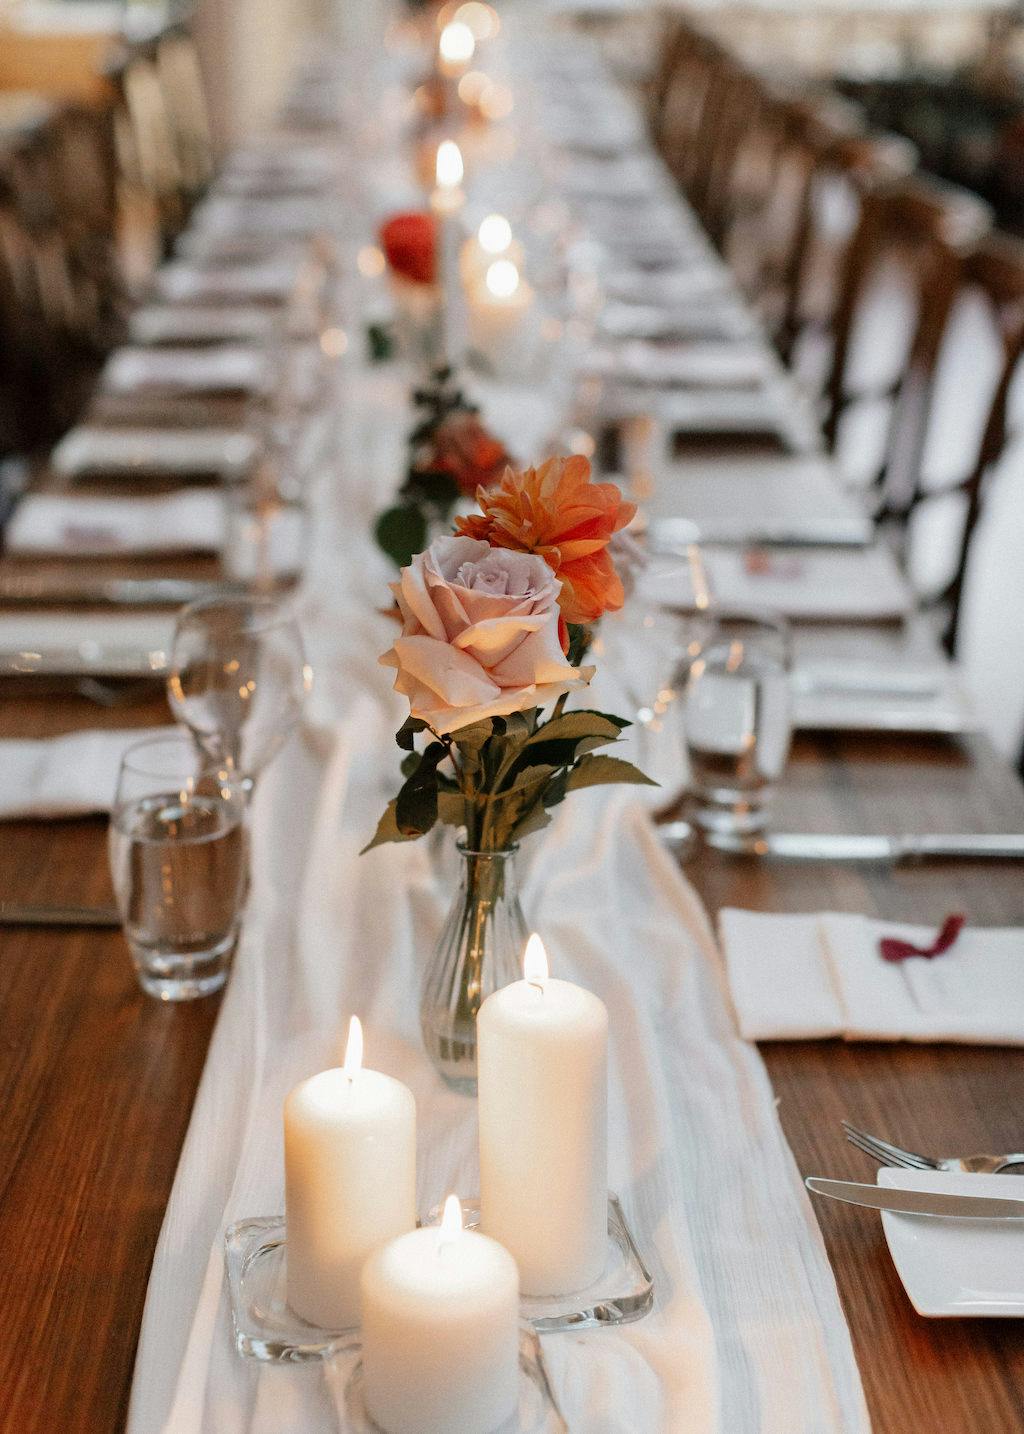 A long, elegantly set dinner table with wooden chairs. The table features a white runner, lit white pillar candles, and a centerpiece of fresh flowers in vases, including pink and orange blooms. Place settings include glassware, napkins, and flatware.